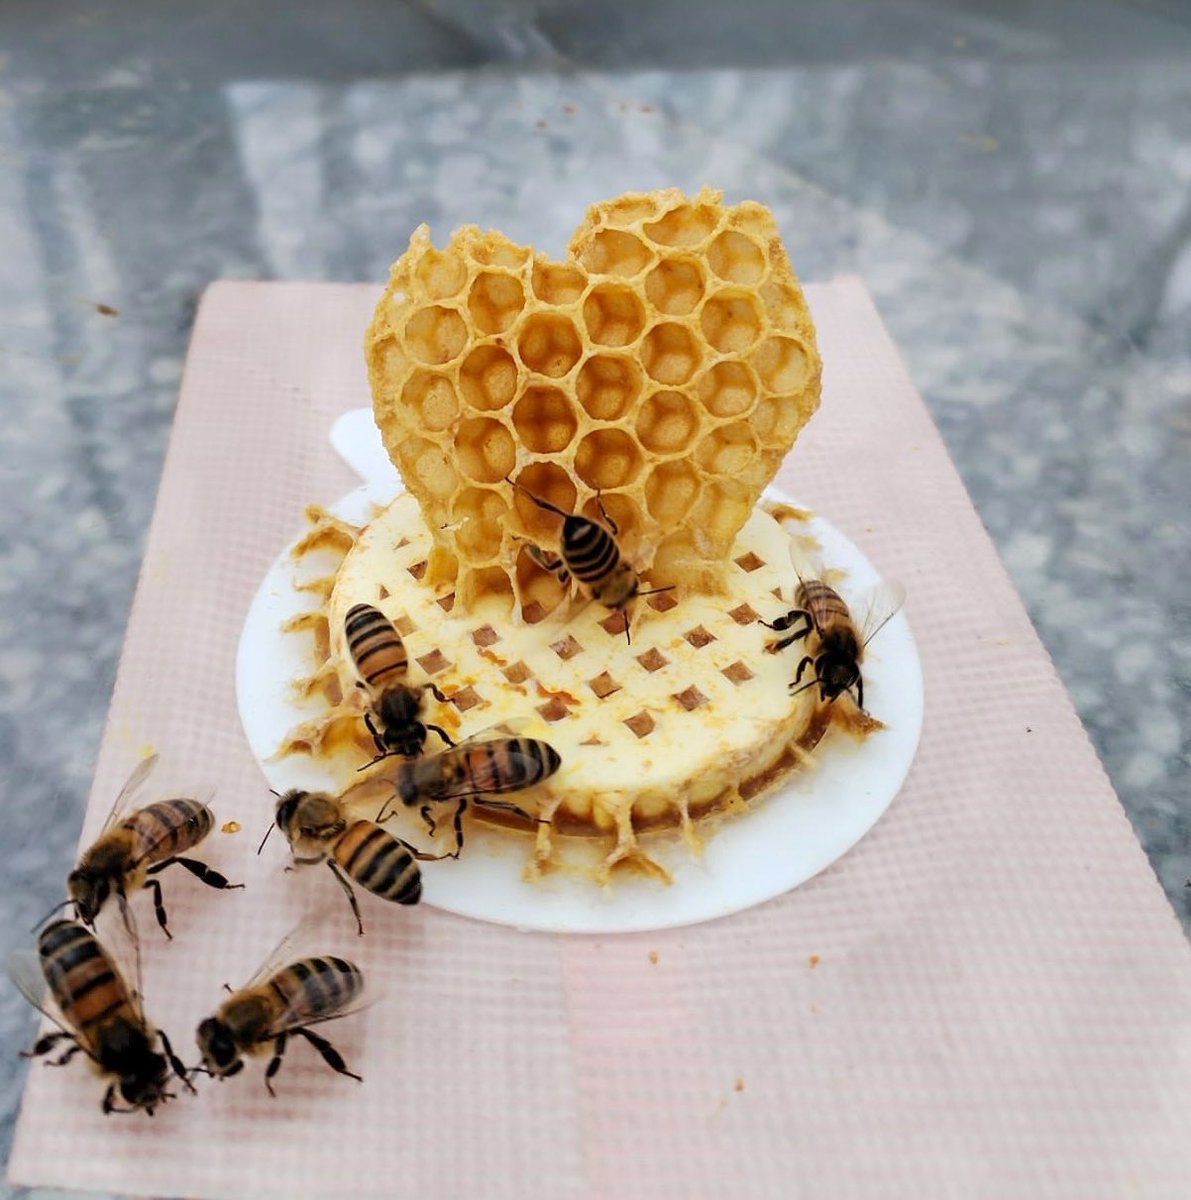 For the love of honey ❤️🐝🍯

#honey #bees #vineyardlifestyle #vineyard #vineyards #meaumemoments #lifestyle #winerylovers #winery #wine #winelovers #winecountry #vino m #wein #chateaulife #winelife #bordeauxvineyard #winelover #bordeauxwine #vineyardviews #winedestinations